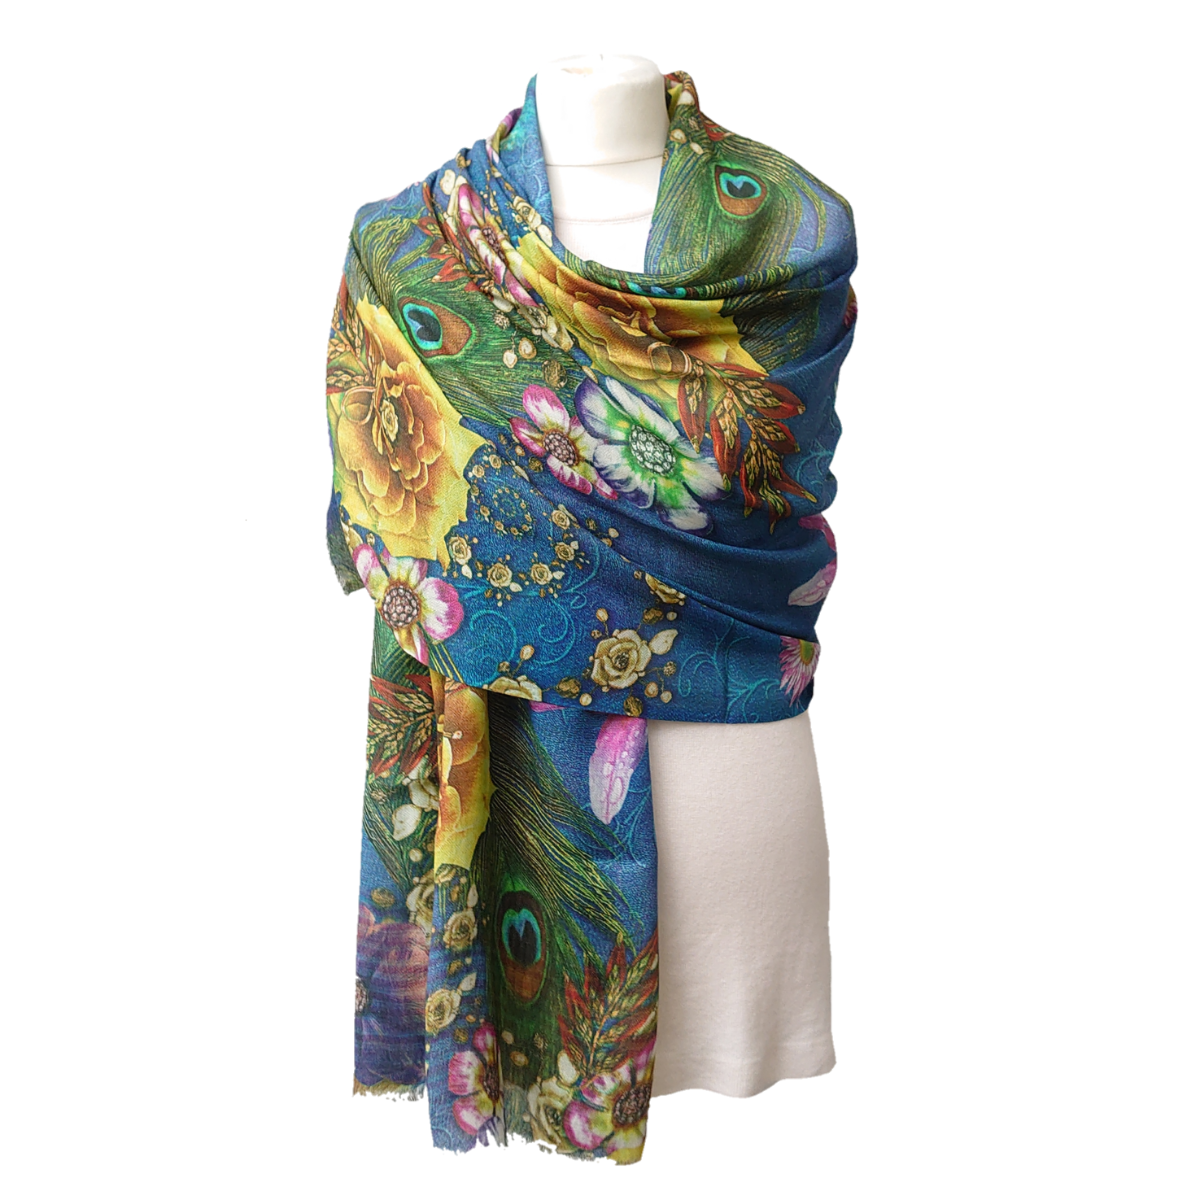 Fine Pashmina Stole - Large Scarf - Peacock Feathers and Flowers Print